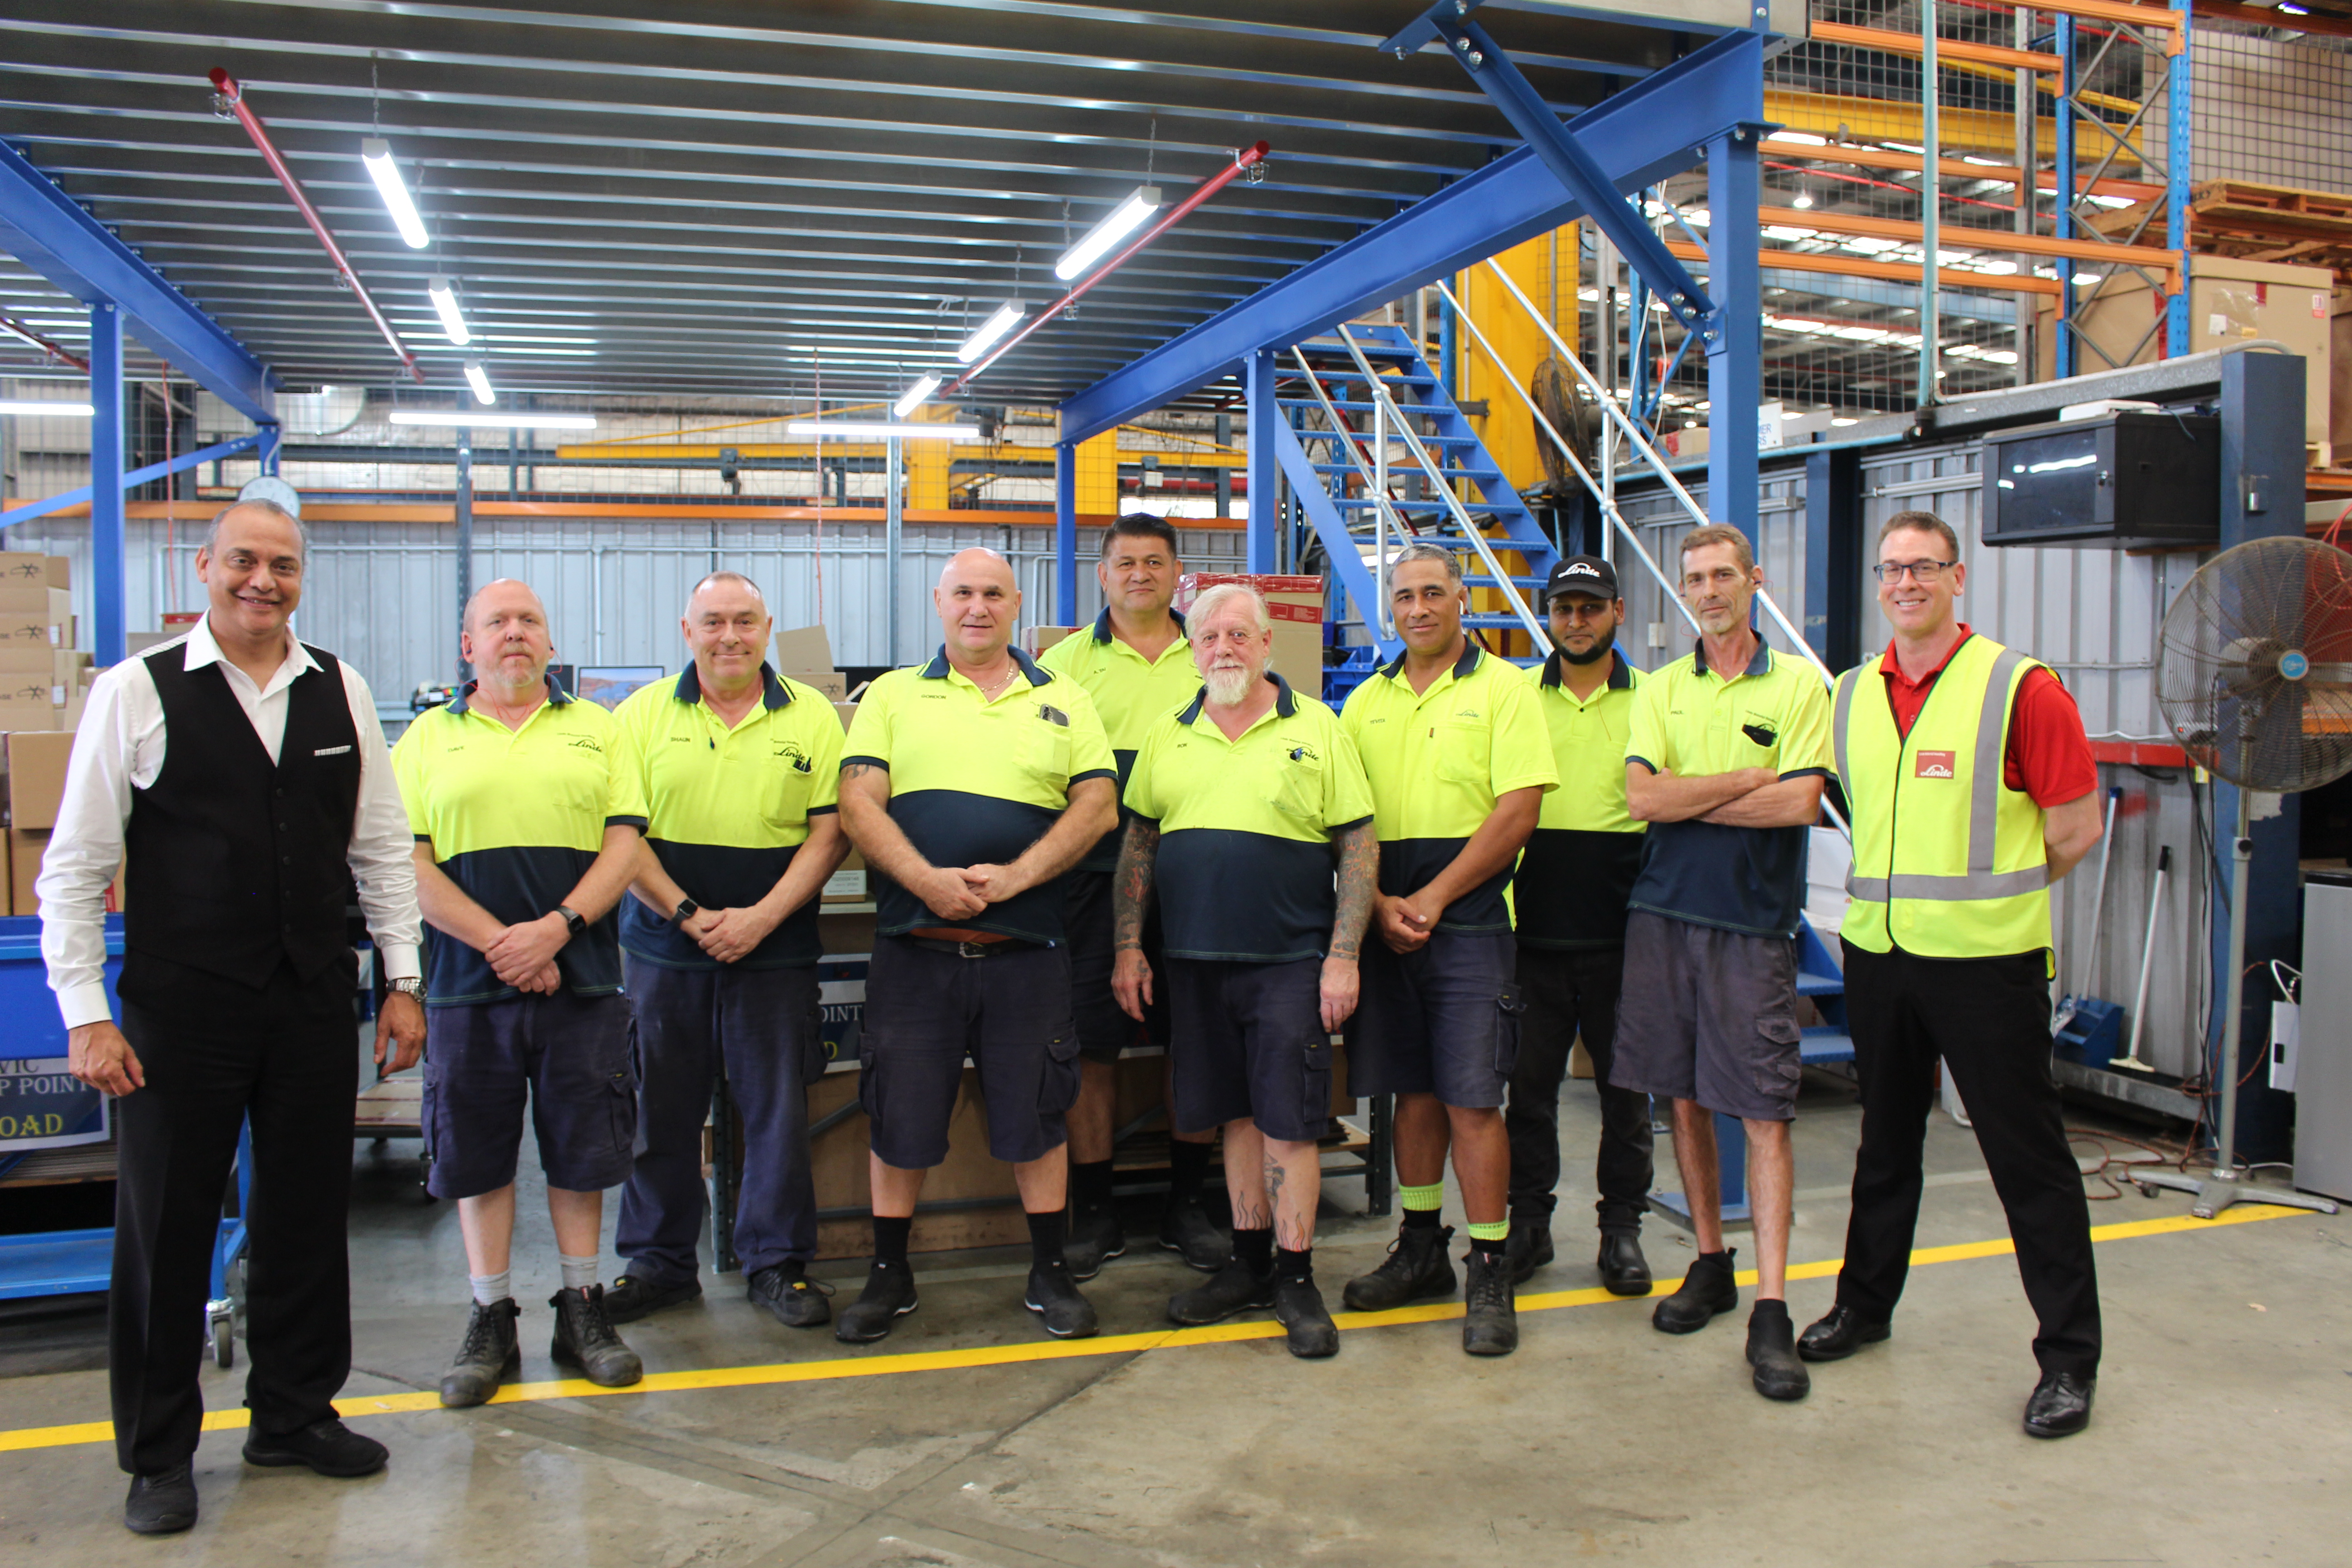 Spare Parts team recently completed Spare Parts renovation to increase warehouse capacity